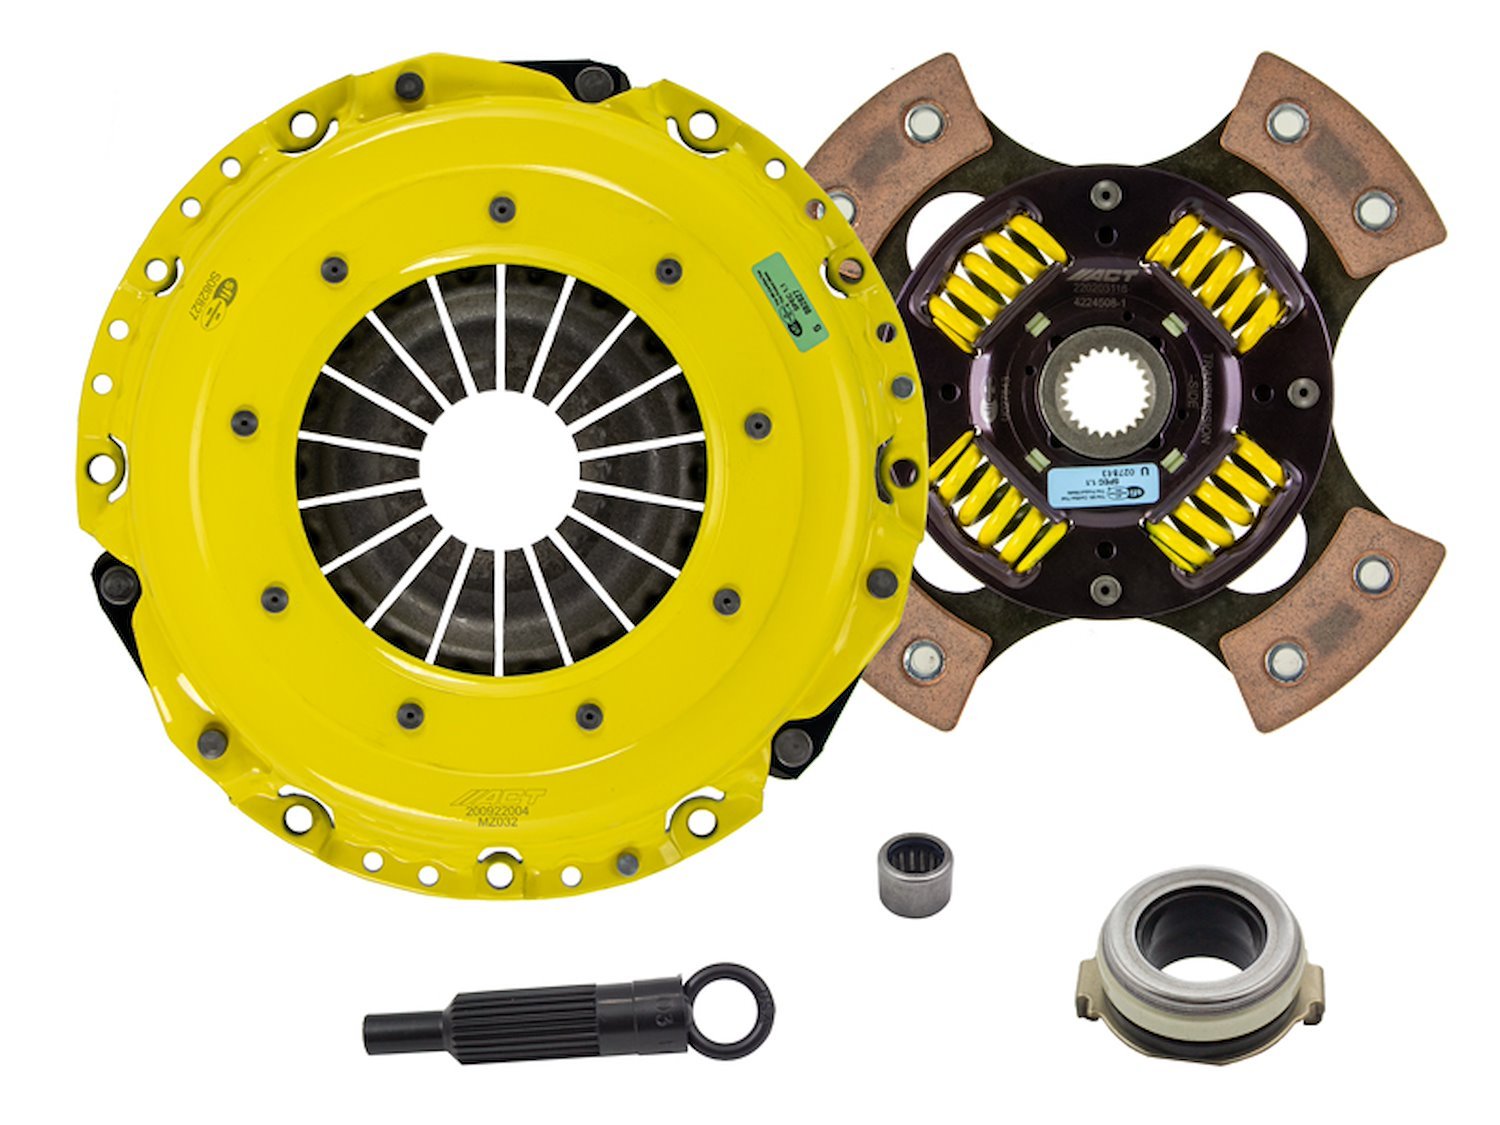 HD/Race Sprung 4-Pad Transmission Clutch Kit Fits Select Ford/Lincoln/Mercury/Mazda